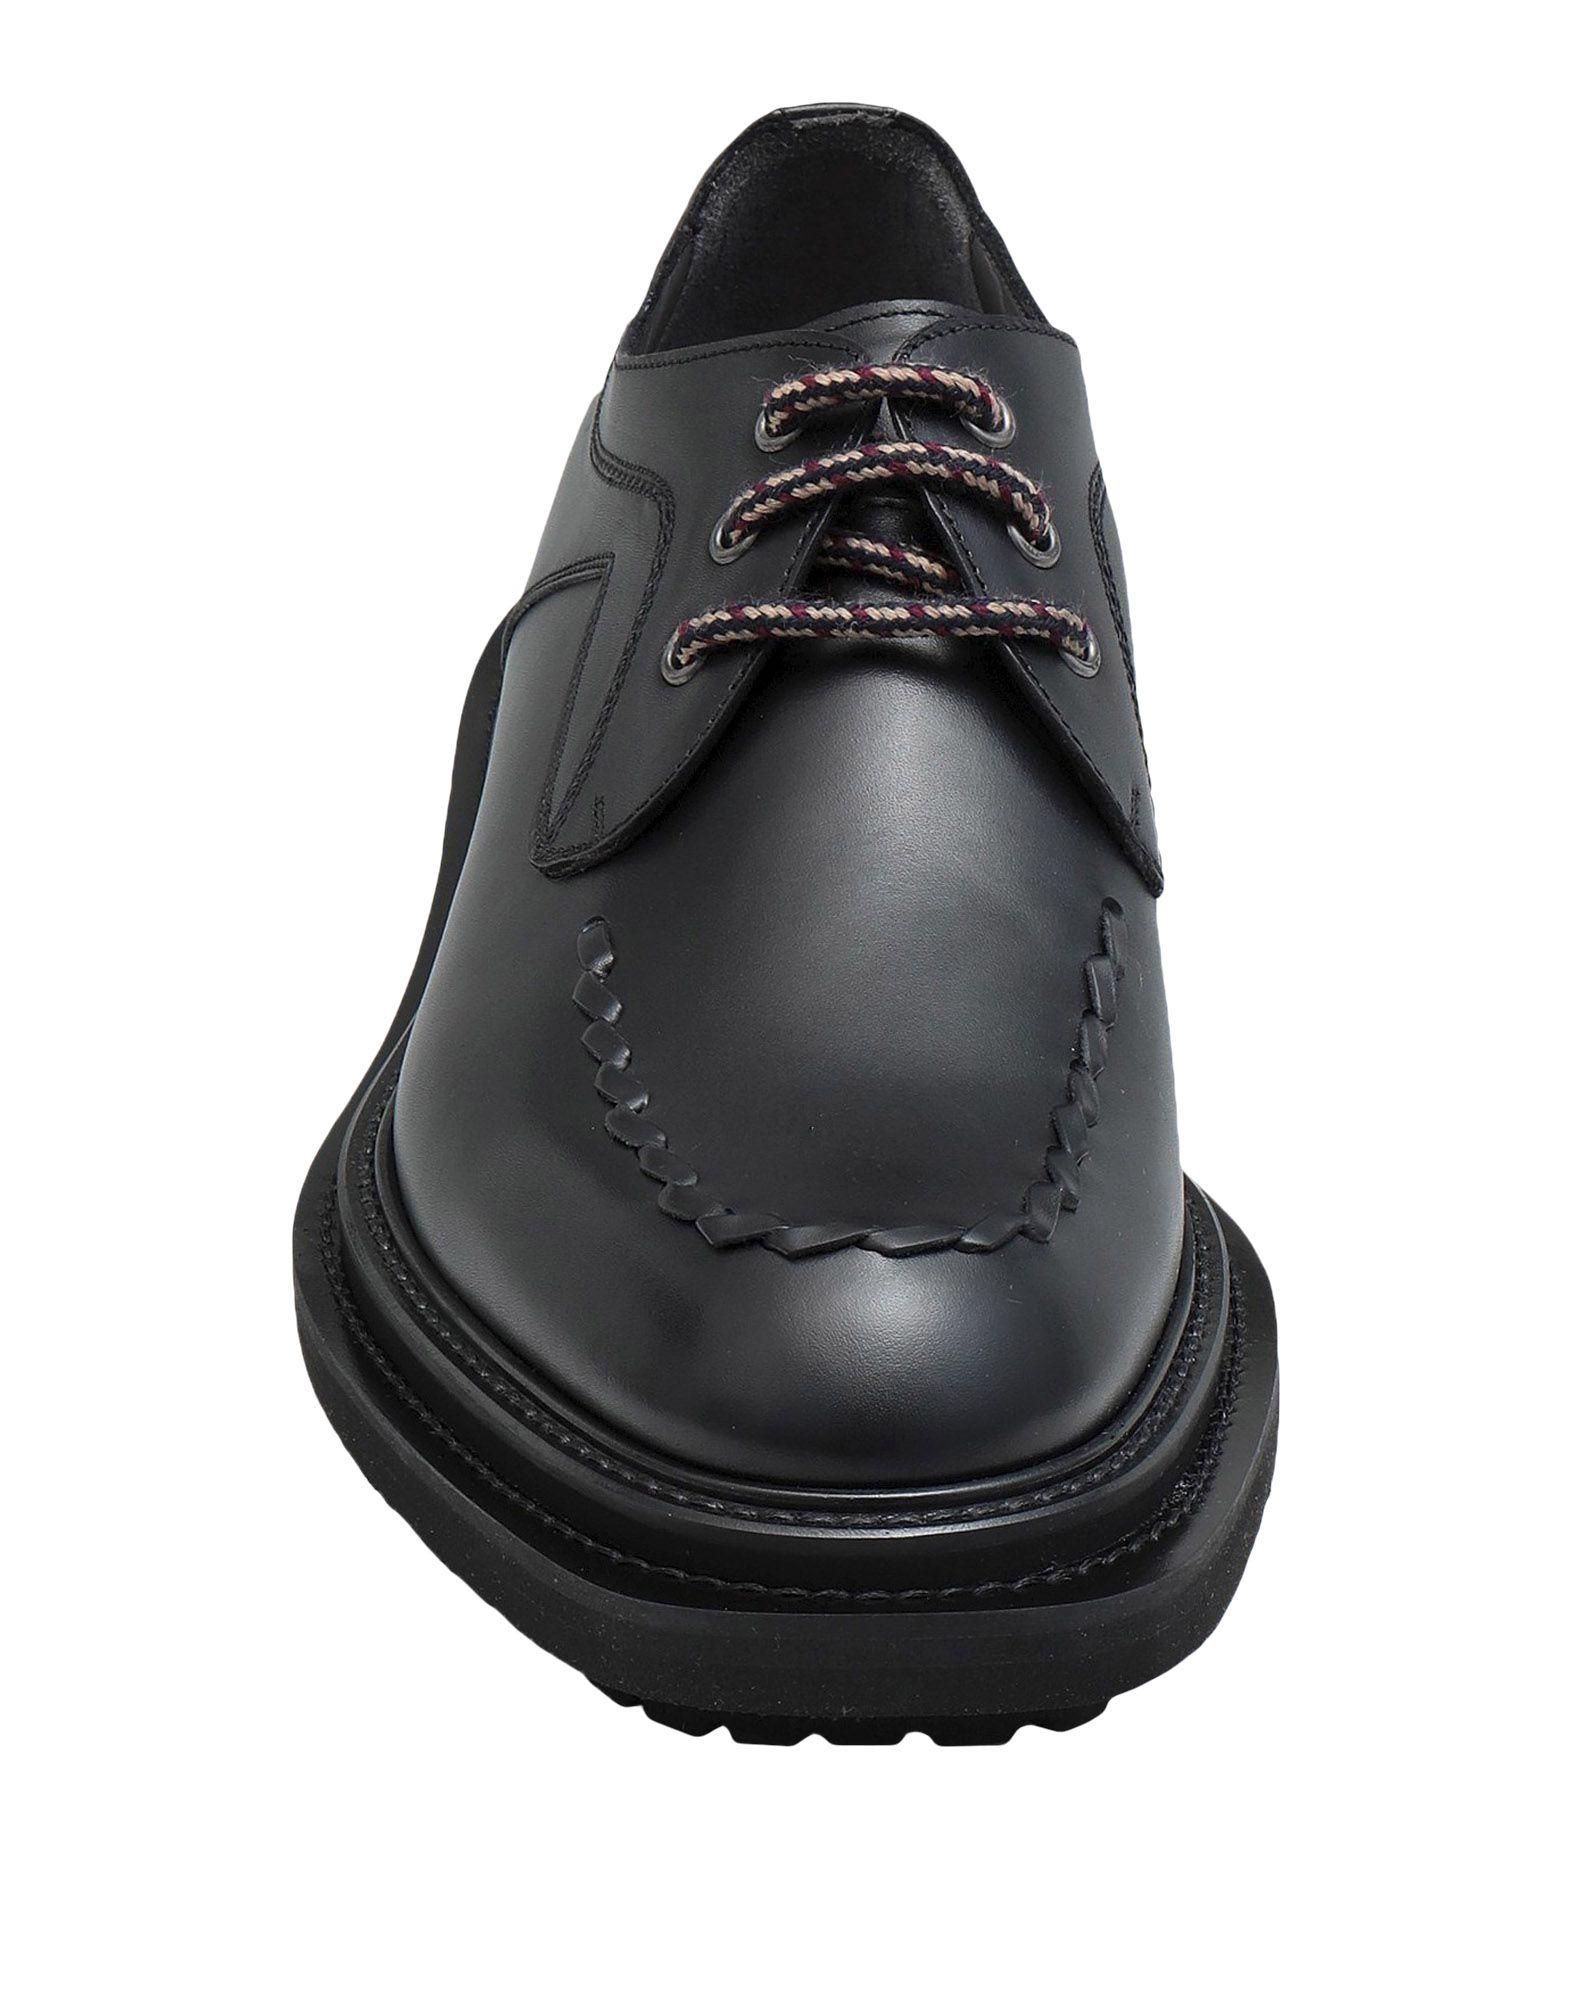 Pollini Lace-up Shoe in Black for Men - Lyst